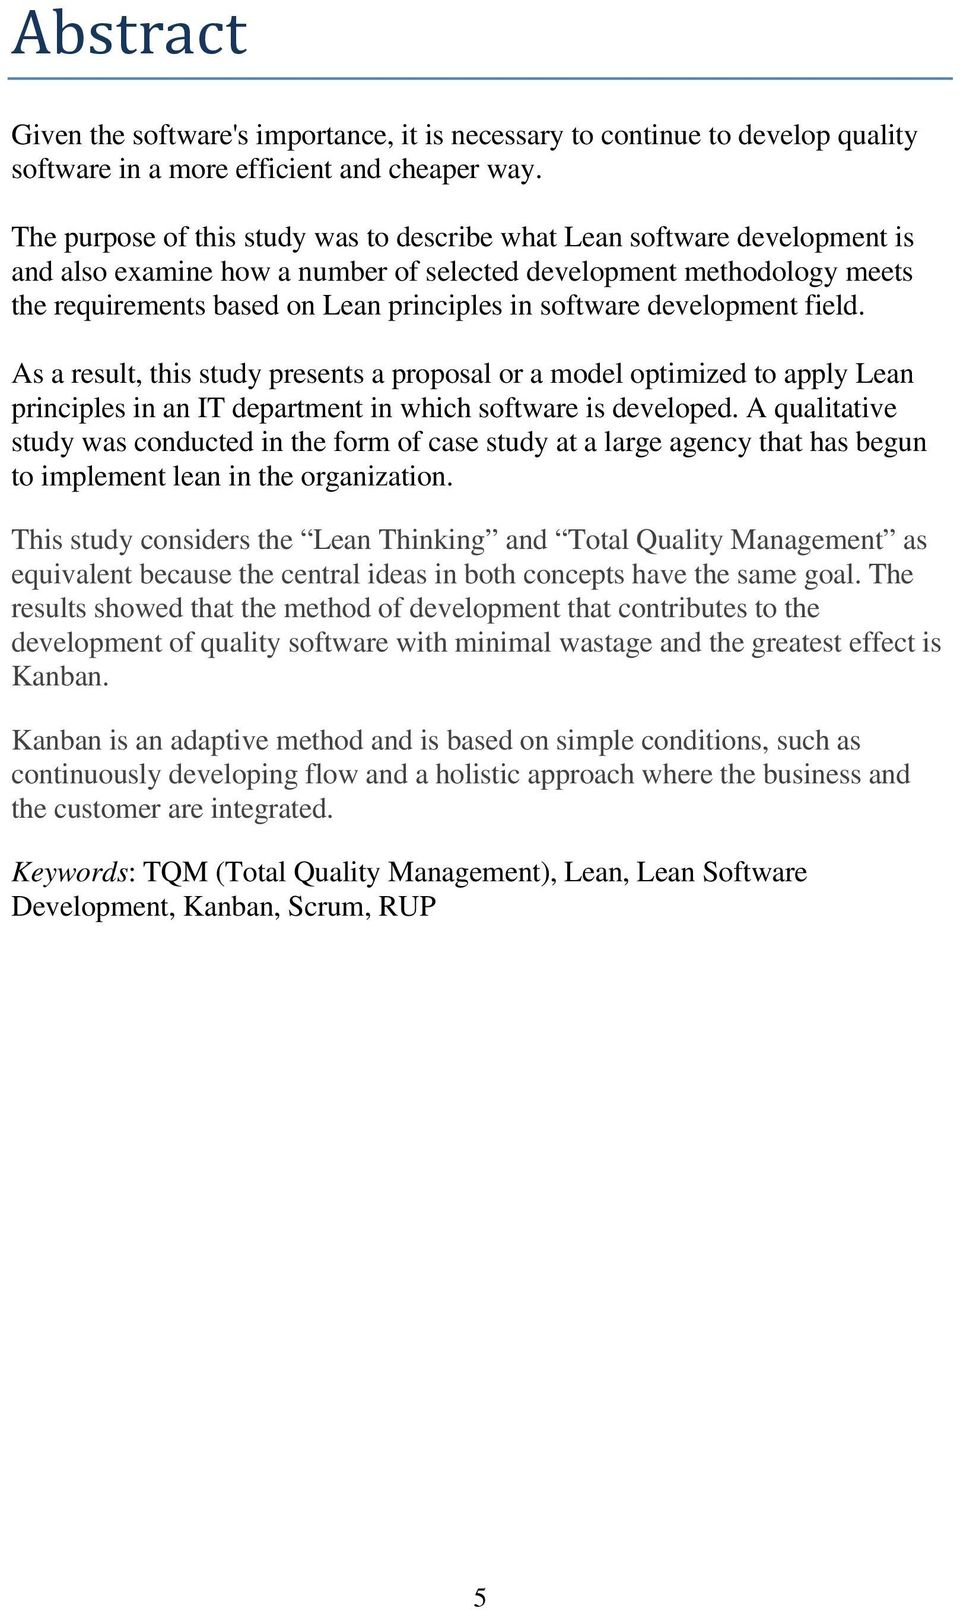 software development field. As a result, this study presents a proposal or a model optimized to apply Lean principles in an IT department in which software is developed.